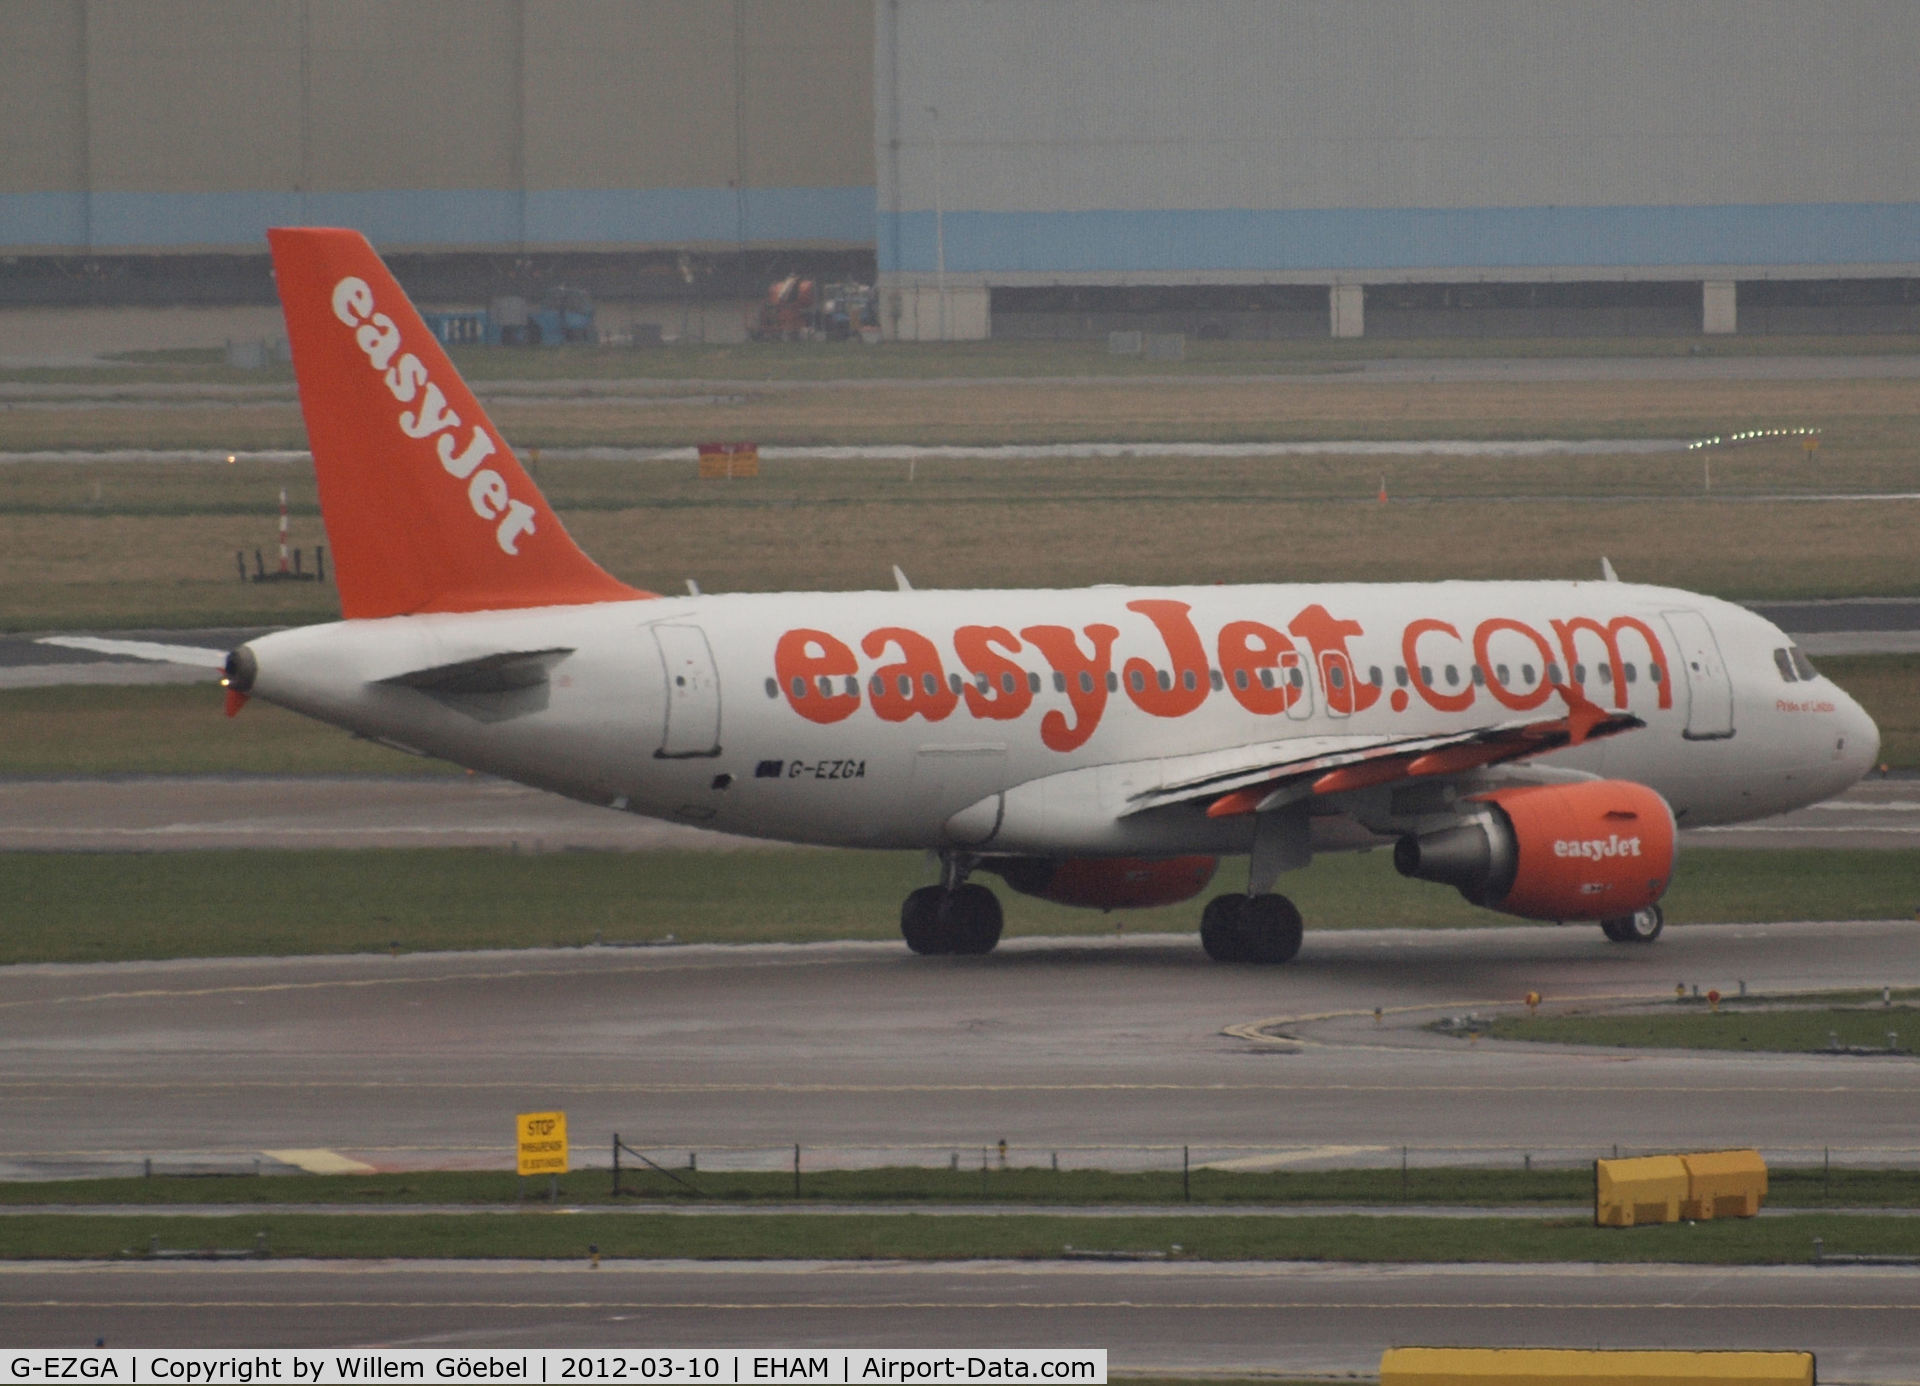 G-EZGA, 2010 Airbus A319-111 C/N 4427, Taxi to runway 24 of Schiphol Airport